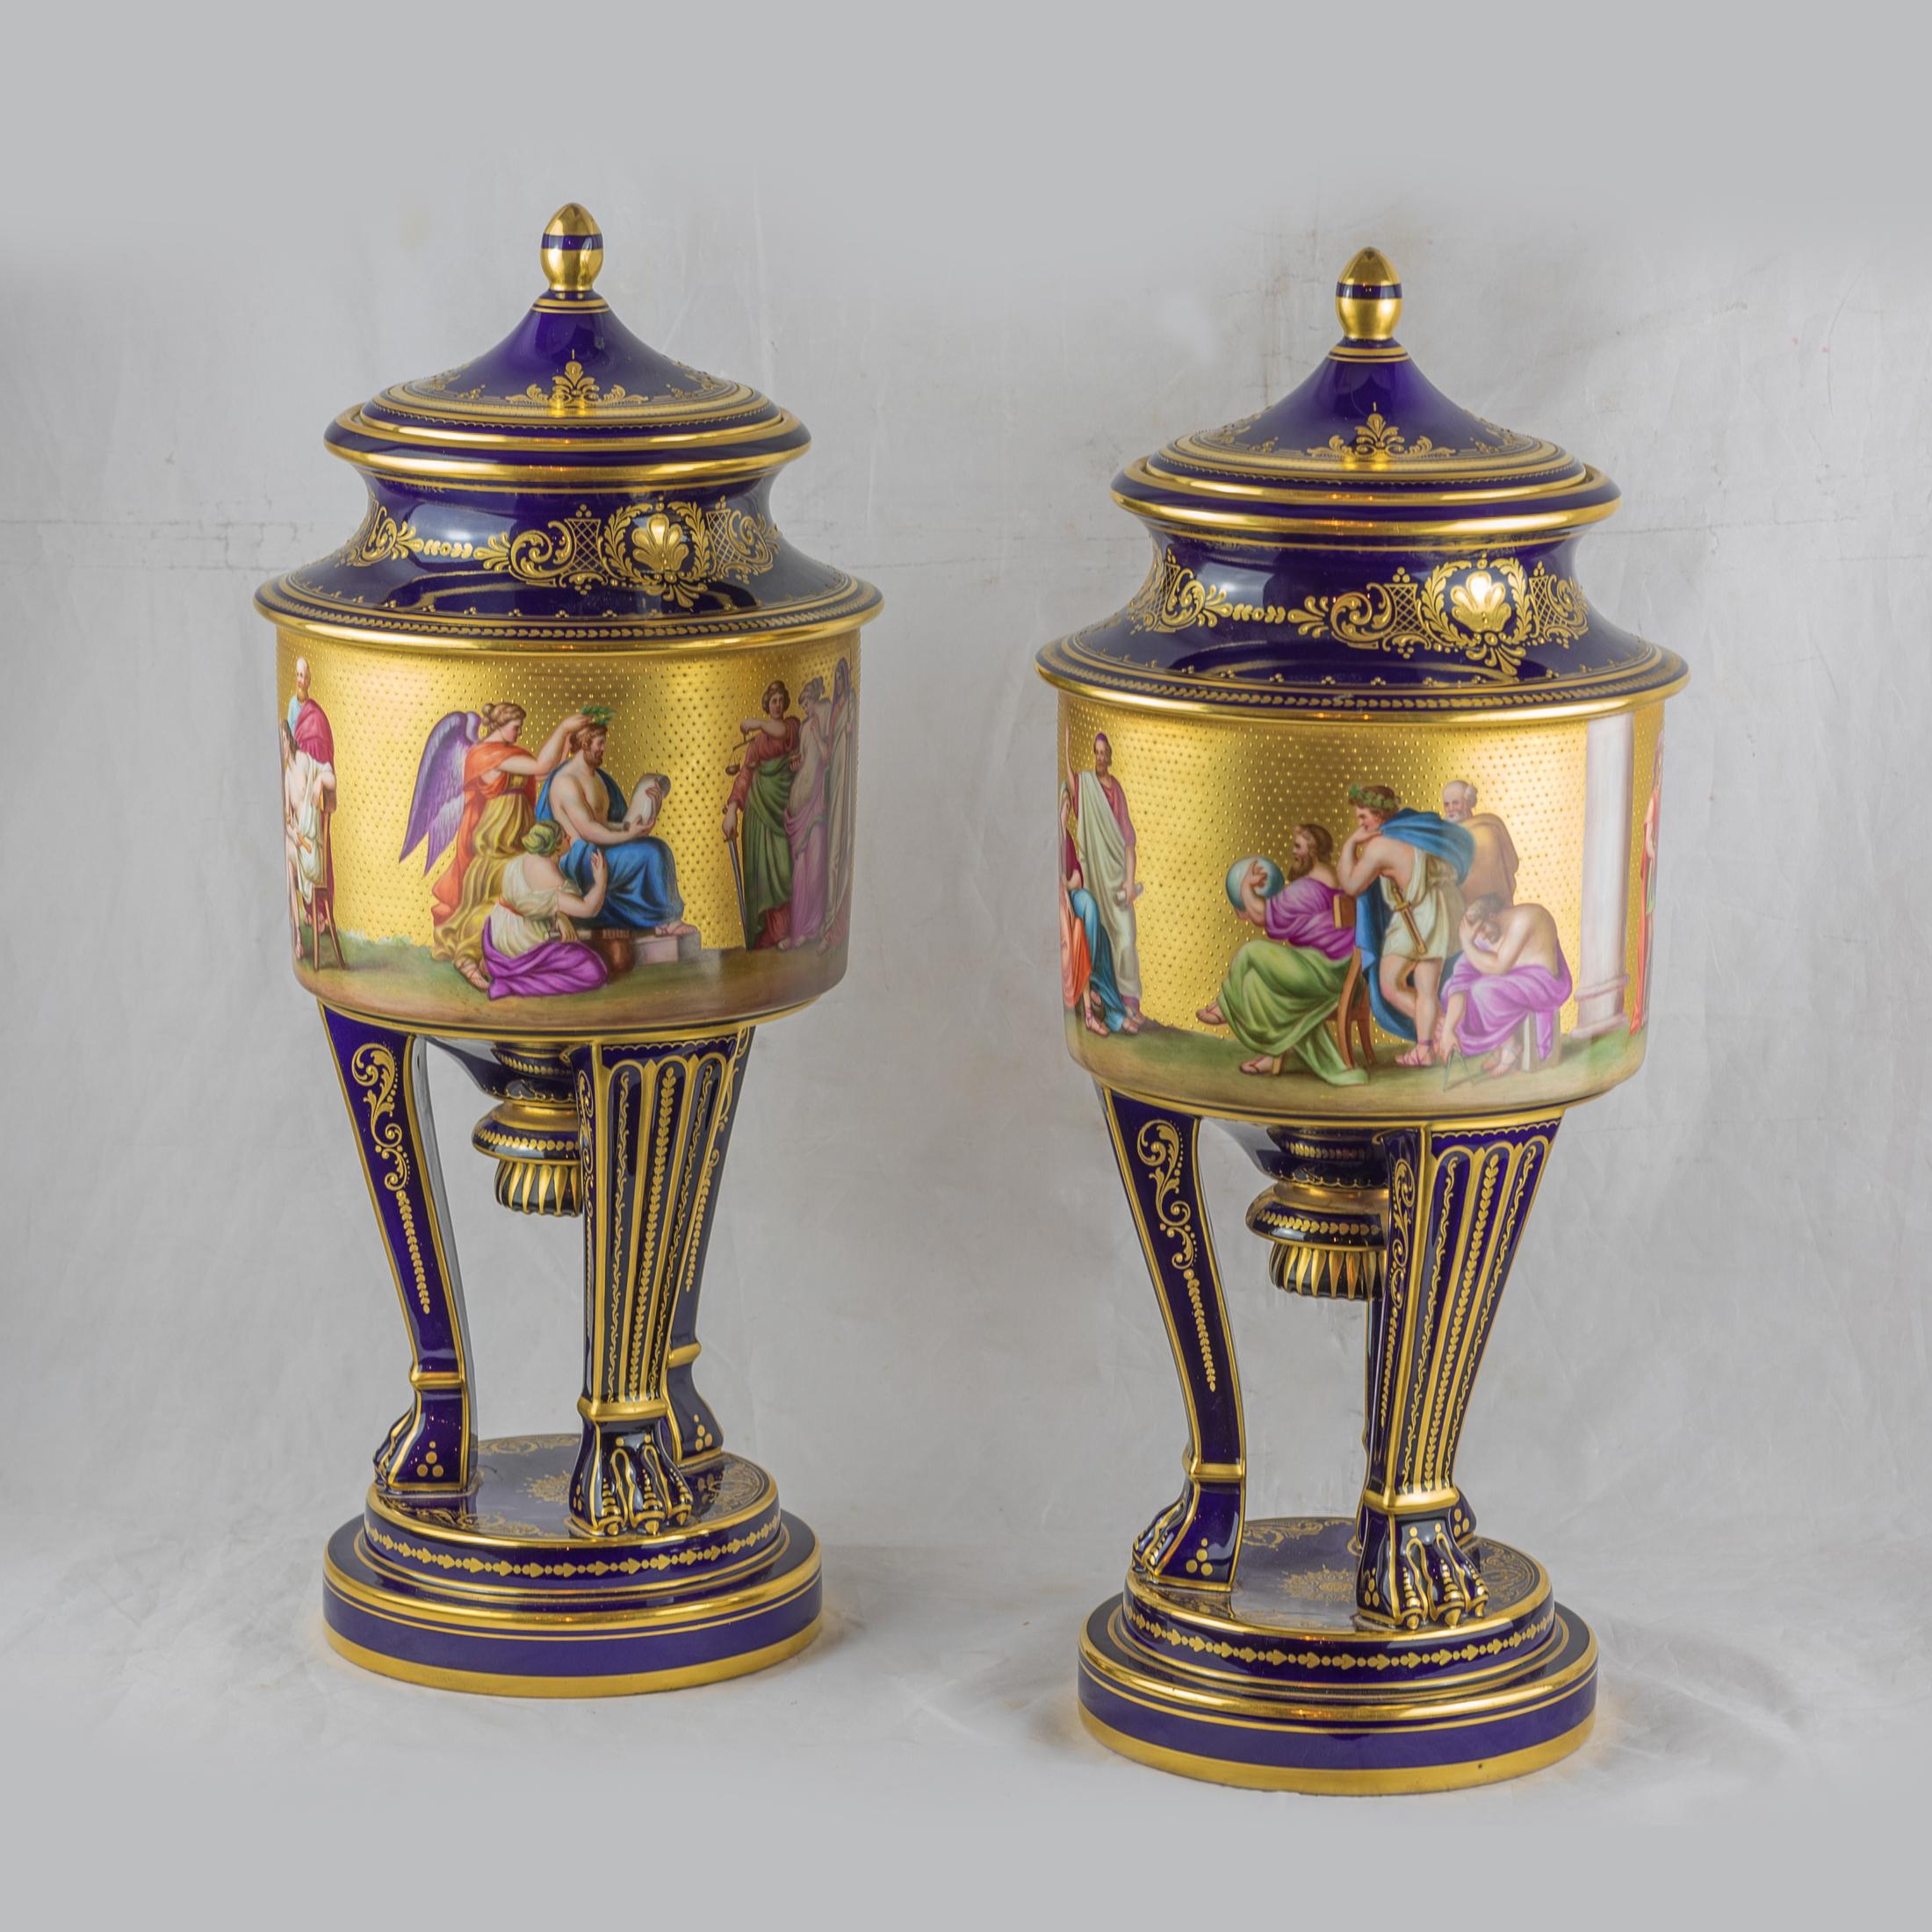 A fine pair of Vienna style porcelain gilt and cobalt-blue ground vases with covers, late 19th century. Each painted with a continuous mythological view, raised on three paw feet above a stepped circular base. The blue beehive marks, gilt mark,